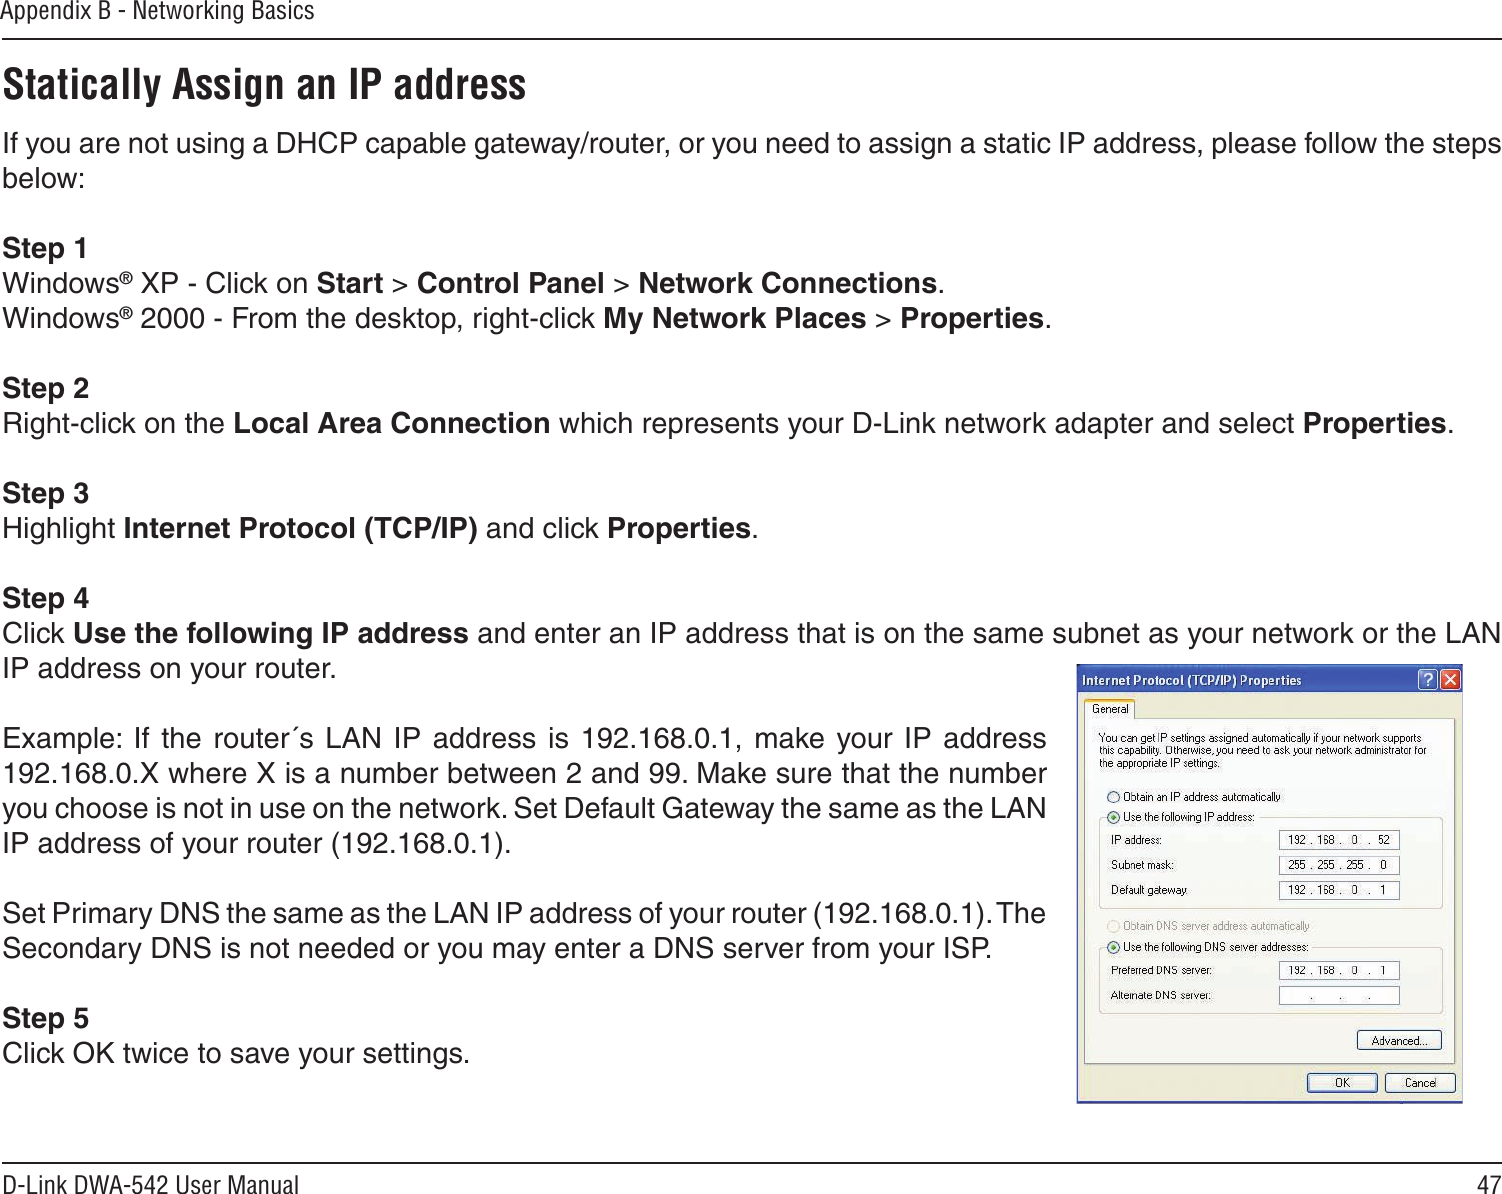 47D-Link DWA-542 User ManualAppendix B - Networking BasicsStatically Assign an IP addressIf you are not using a DHCP capable gateway/router, or you need to assign a static IP address, please follow the steps below:Step 1Windows® XP - Click on Start &gt; Control Panel &gt; Network Connections.Windows® 2000 - From the desktop, right-click My Network Places &gt; Properties.Step 2Right-click on the Local Area Connection which represents your D-Link network adapter and select Properties.Step 3Highlight Internet Protocol (TCP/IP) and click Properties.Step 4Click Use the following IP address and enter an IP address that is on the same subnet as your network or the LAN IP address on your router. Example:  If  the  router´s LAN IP  address  is  192.168.0.1,  make your  IP  address 192.168.0.X where X is a number between 2 and 99. Make sure that the number you choose is not in use on the network. Set Default Gateway the same as the LAN IP address of your router (192.168.0.1). Set Primary DNS the same as the LAN IP address of your router (192.168.0.1). The Secondary DNS is not needed or you may enter a DNS server from your ISP.Step 5Click OK twice to save your settings.